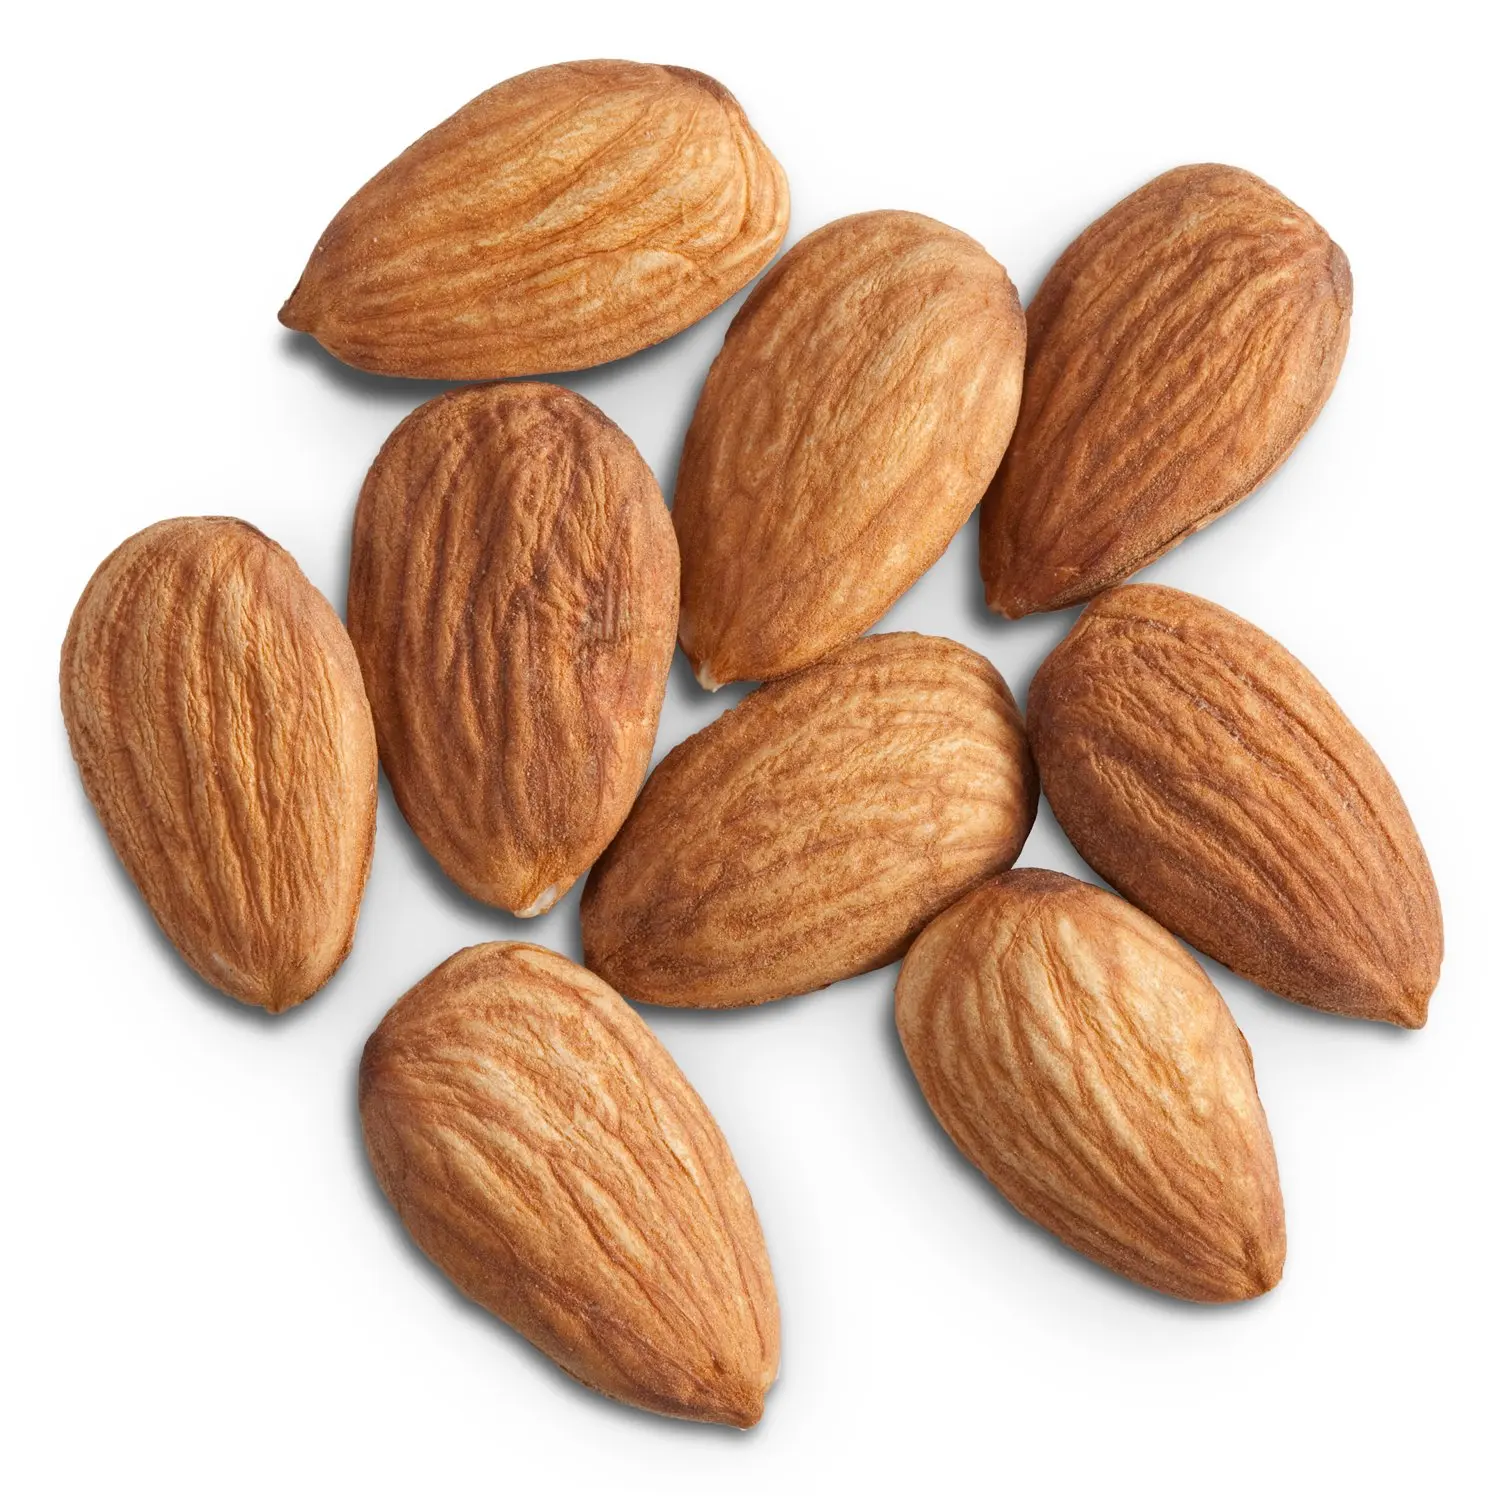 wholesale raw almonds nuts